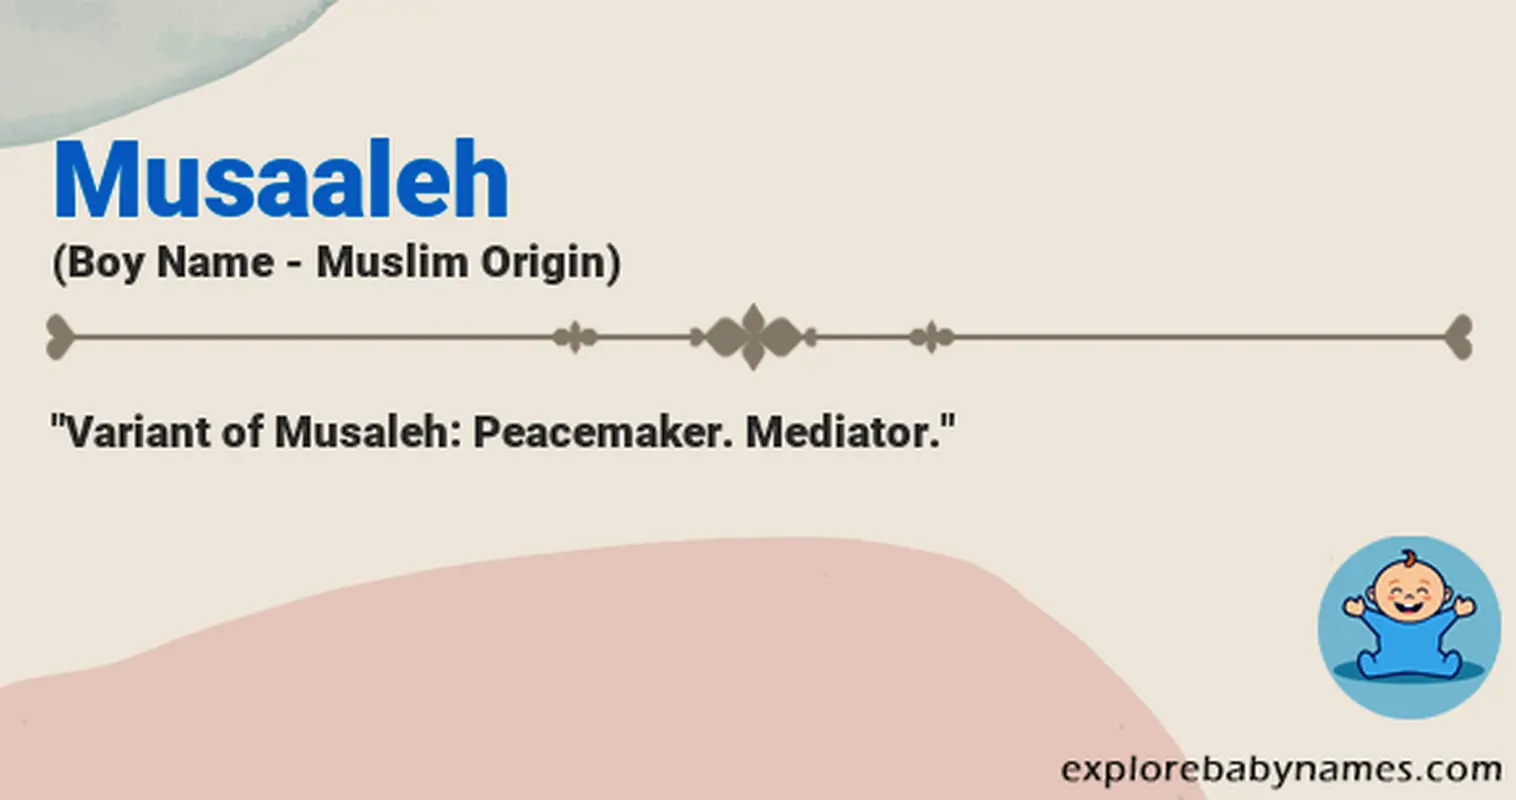 Meaning of Musaaleh